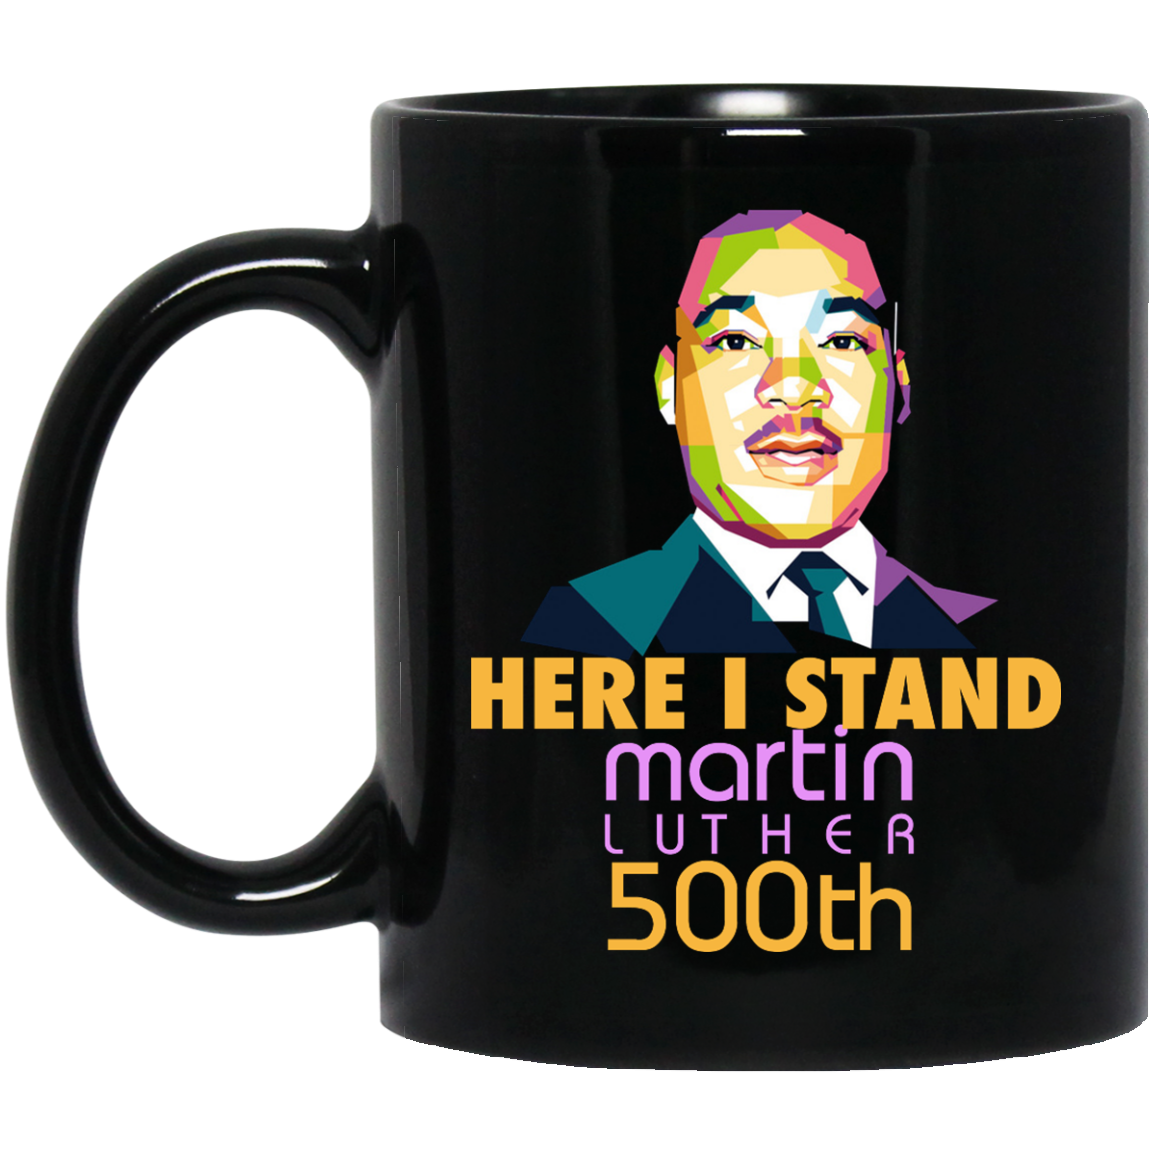 Here I stand, Martin Luther 500th mugs